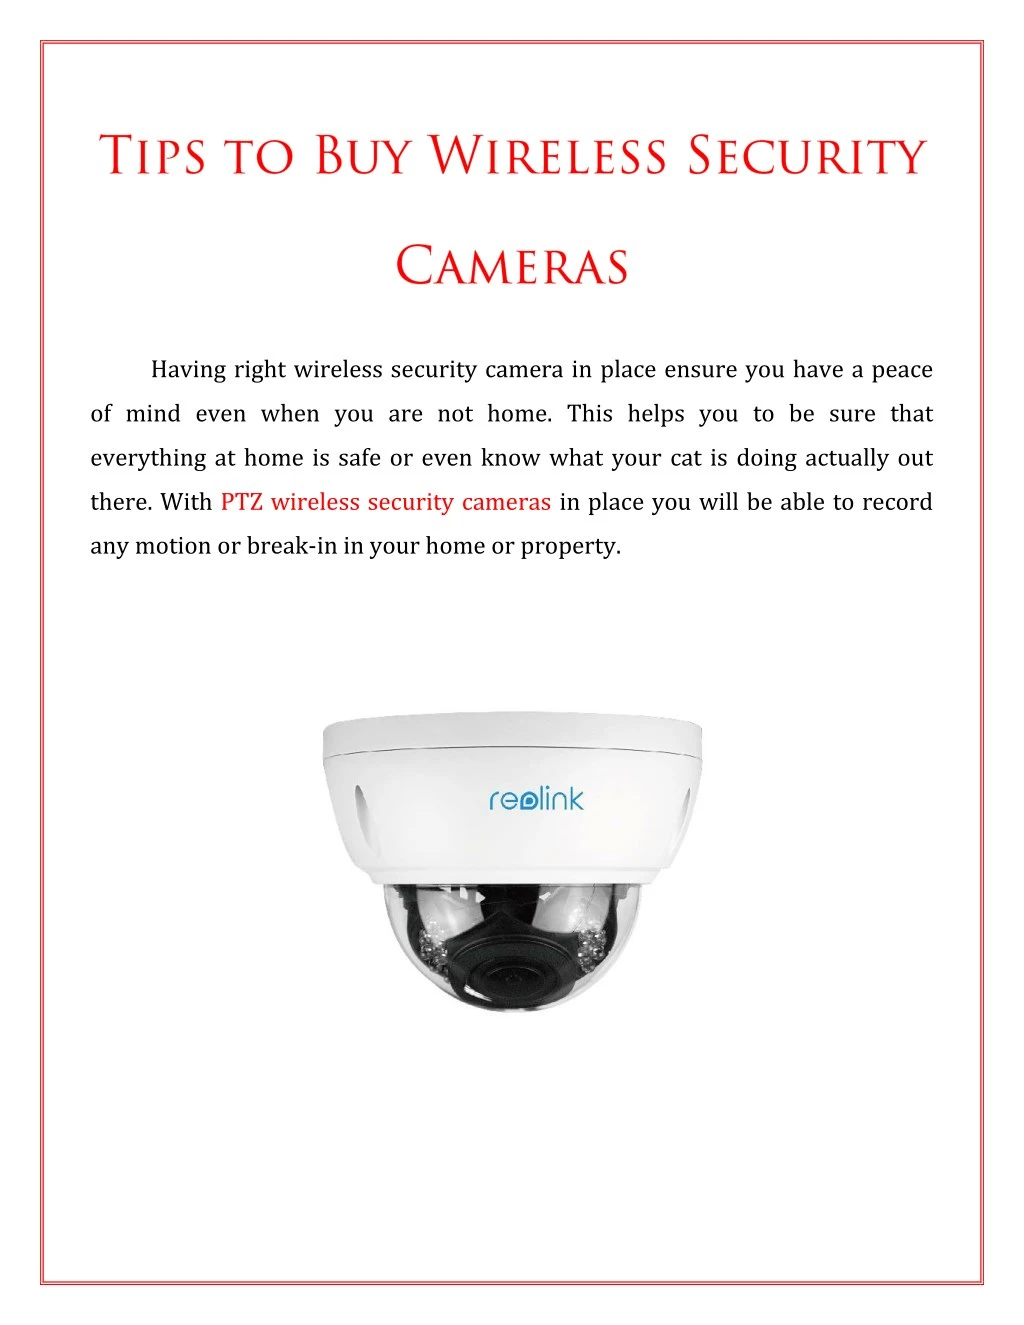 having right wireless security camera in place